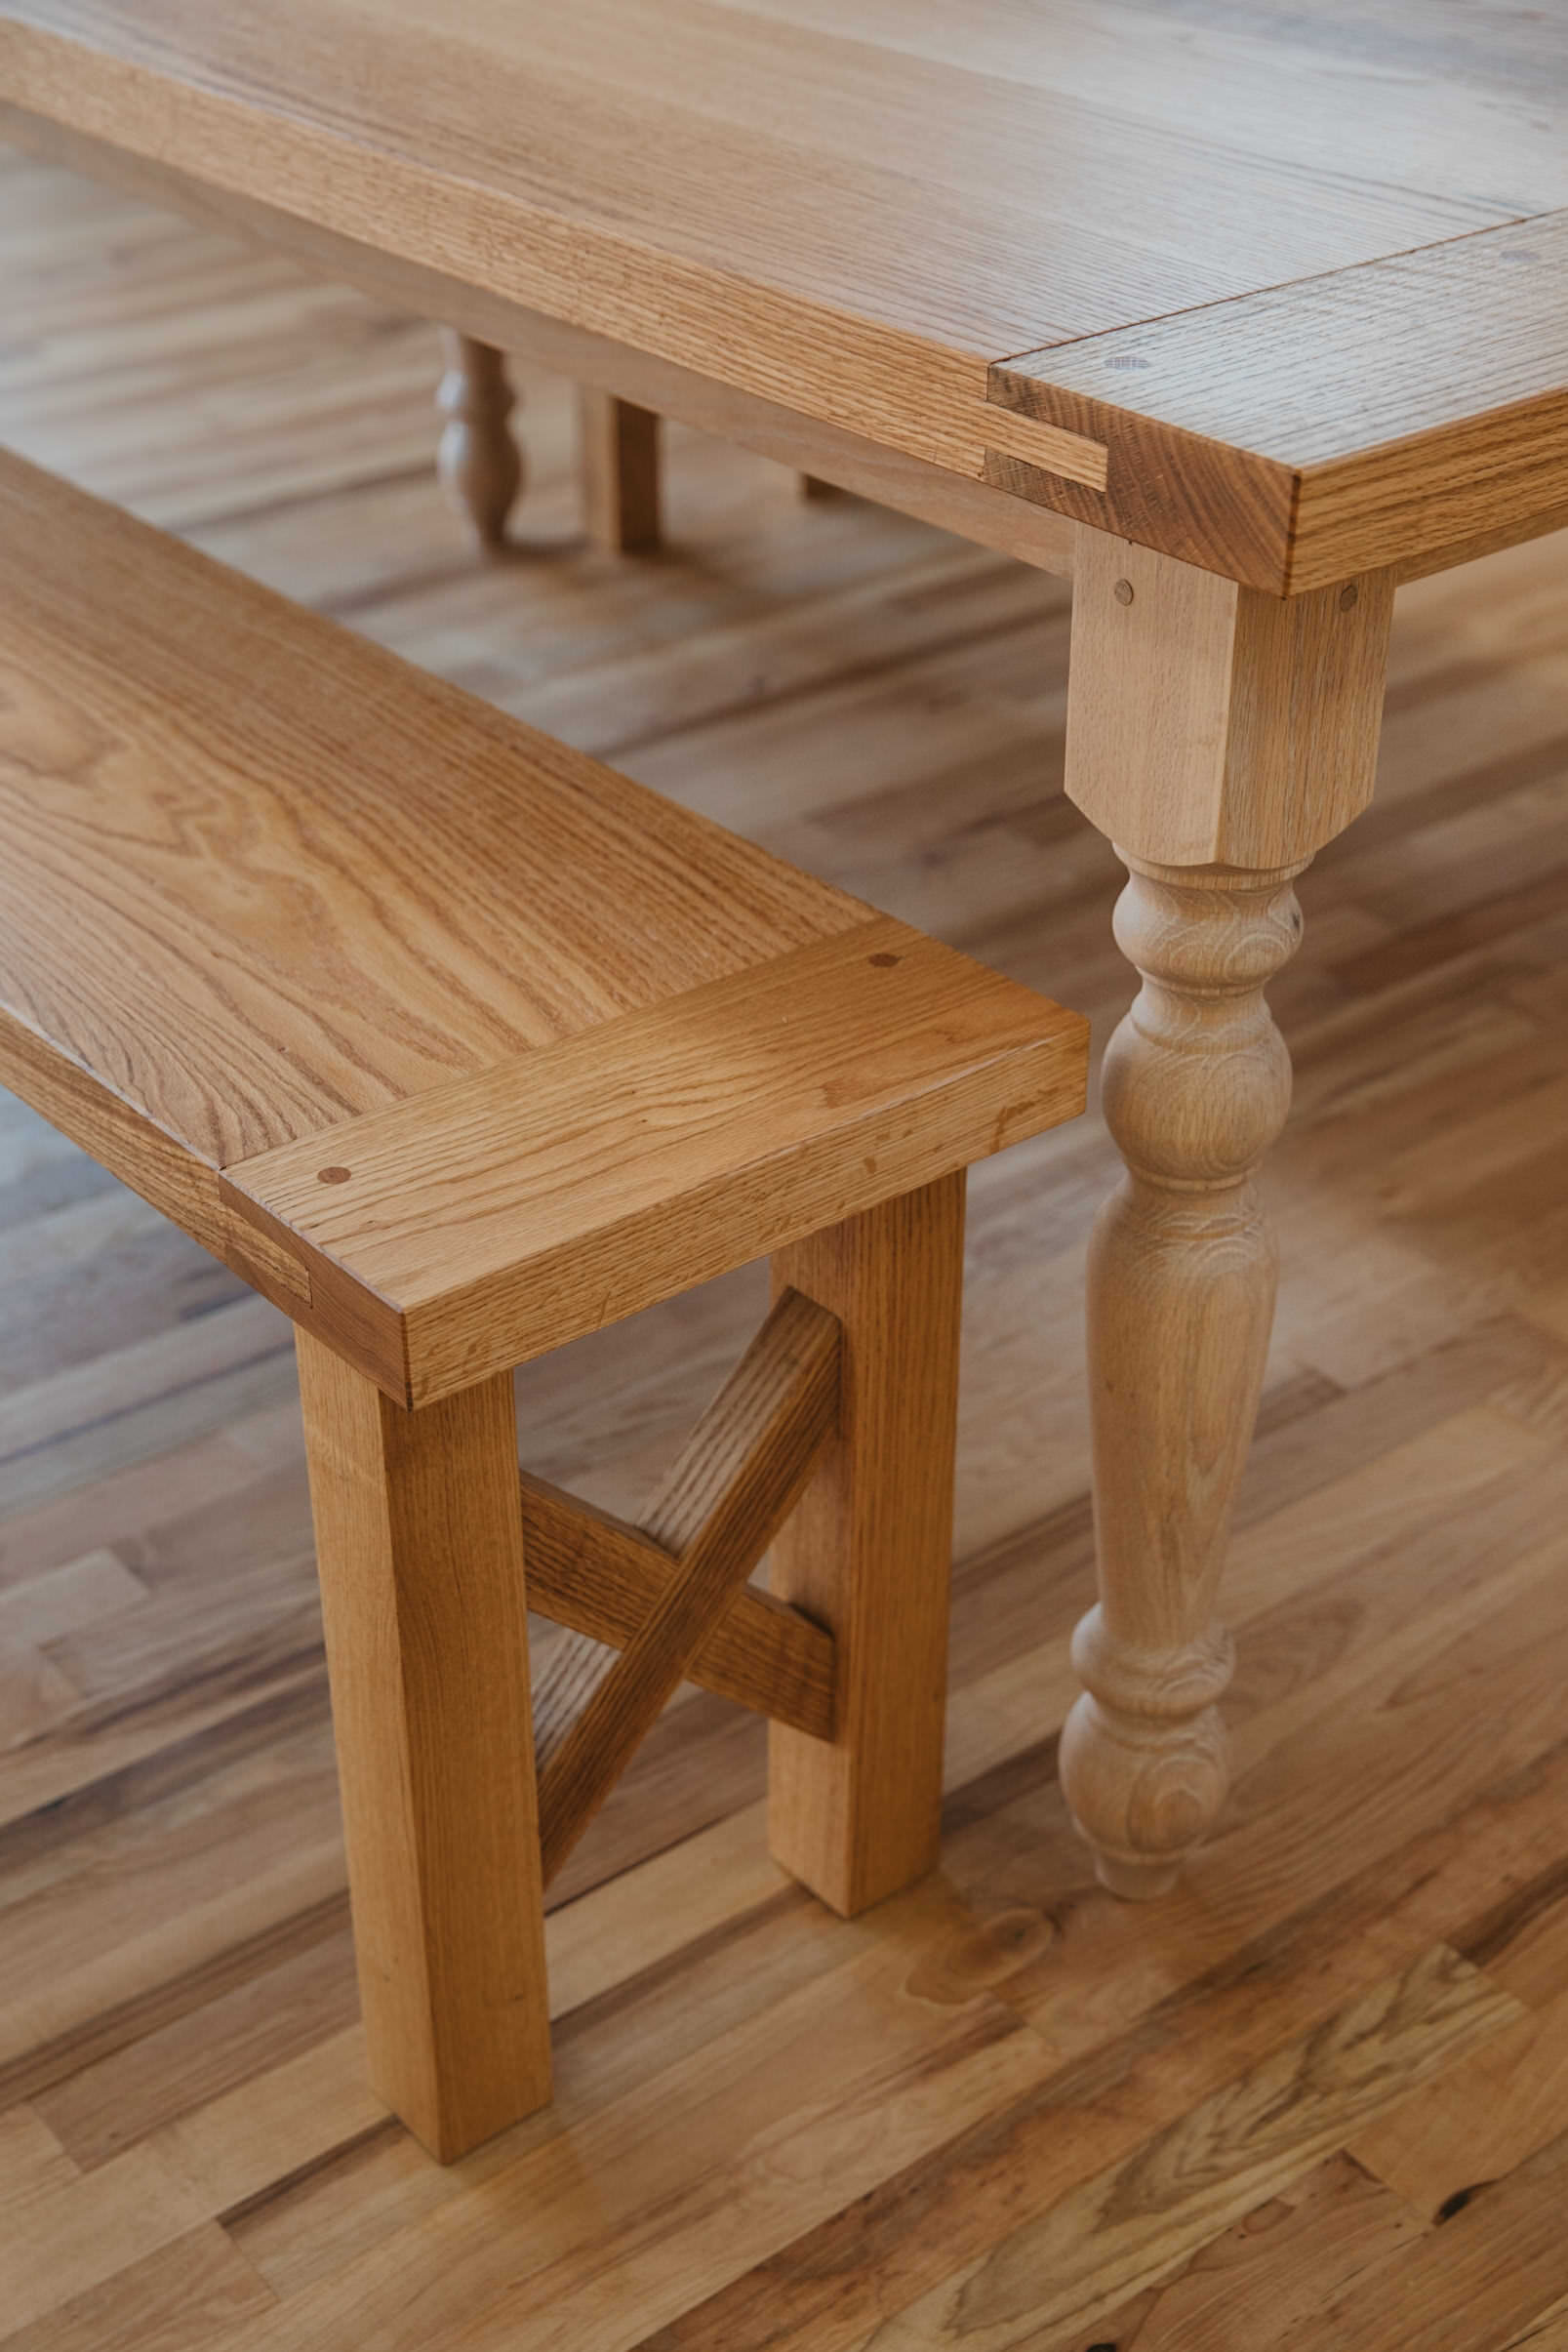 Big_tooth_Co-custom furniture maker_southern charm_farm_table_benches -16.jpg